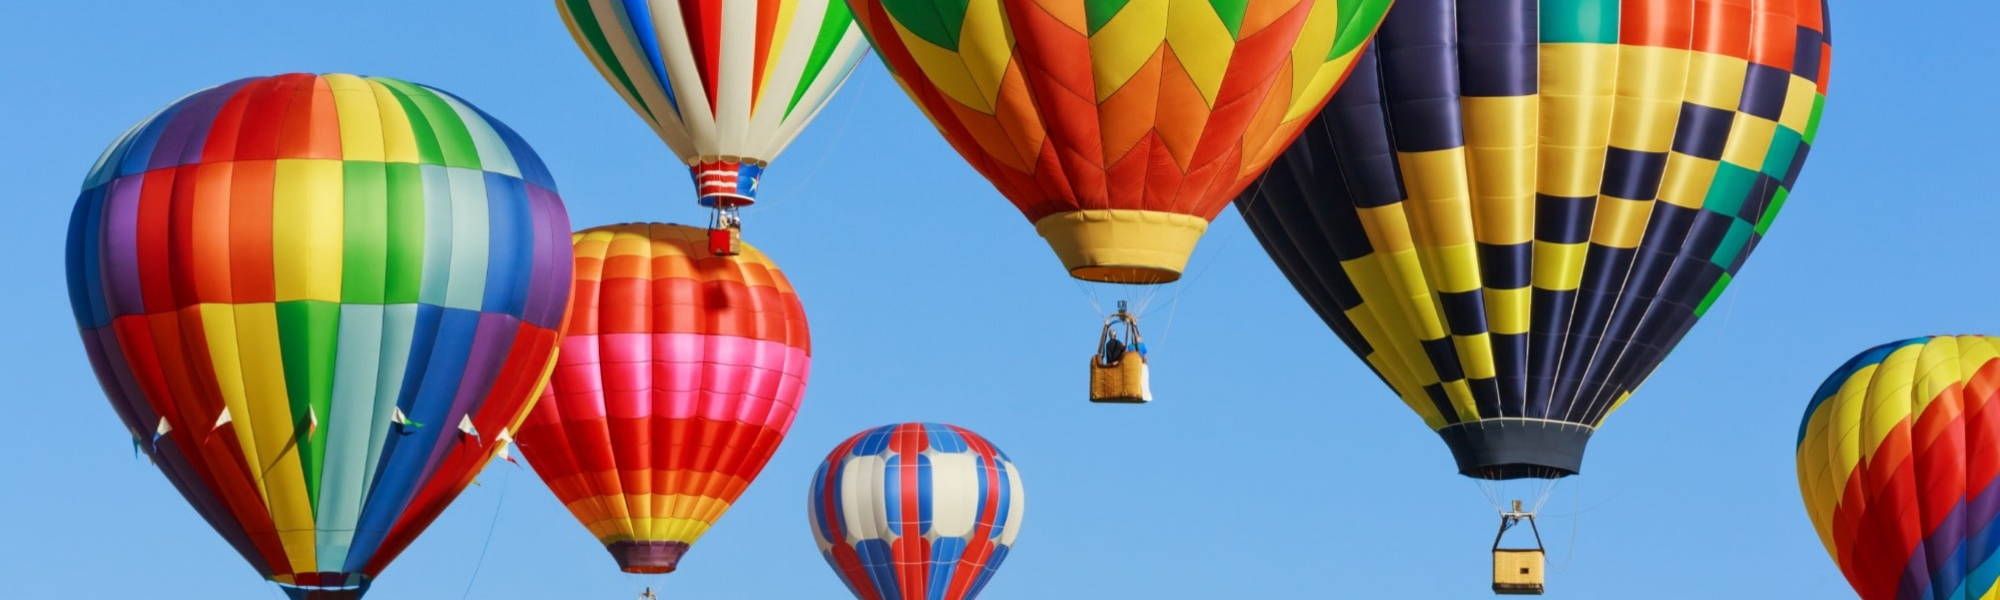 coloured hot air balloons in sky 